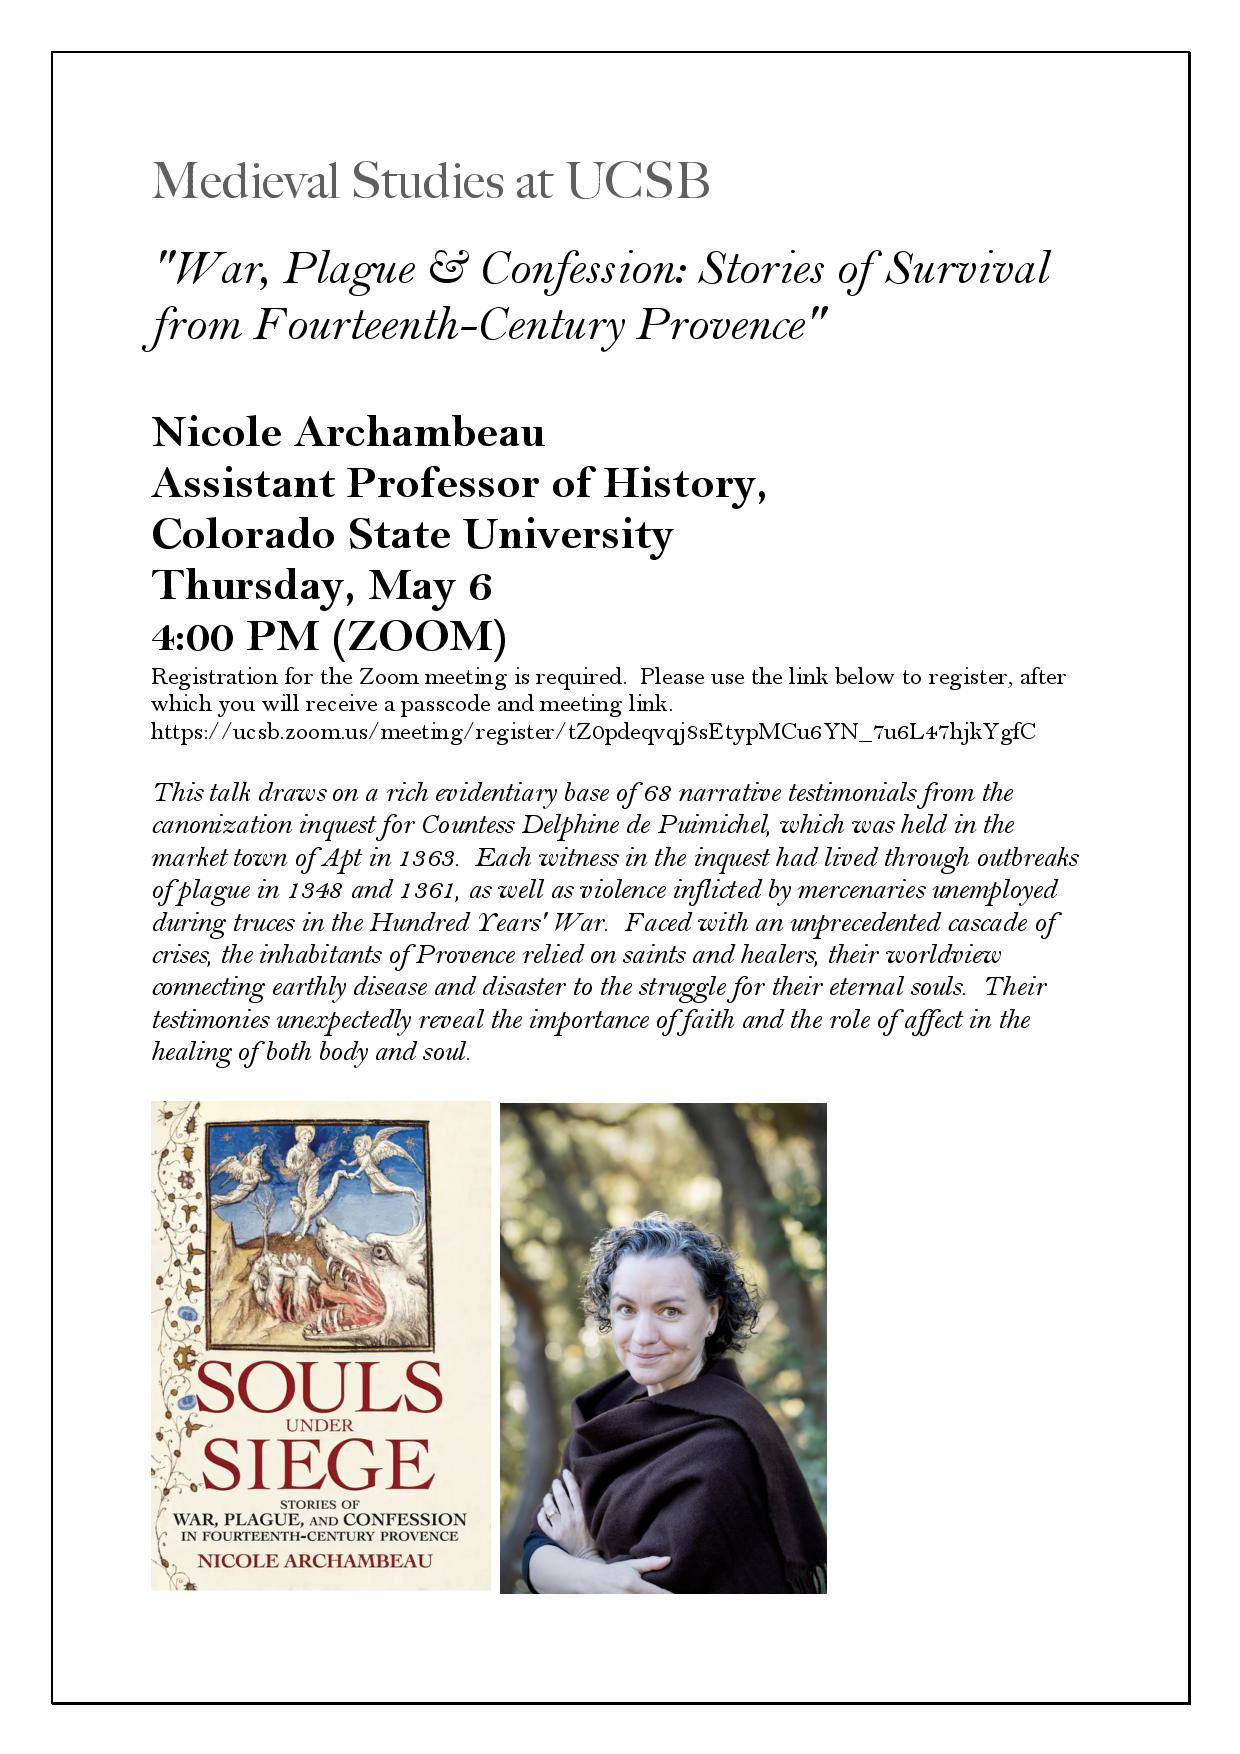 Flyer for zoom talk for "War, Plague & Confession: Stories of Survival from Fourteenth-Century Provence" on 5/6/21 at 4PM